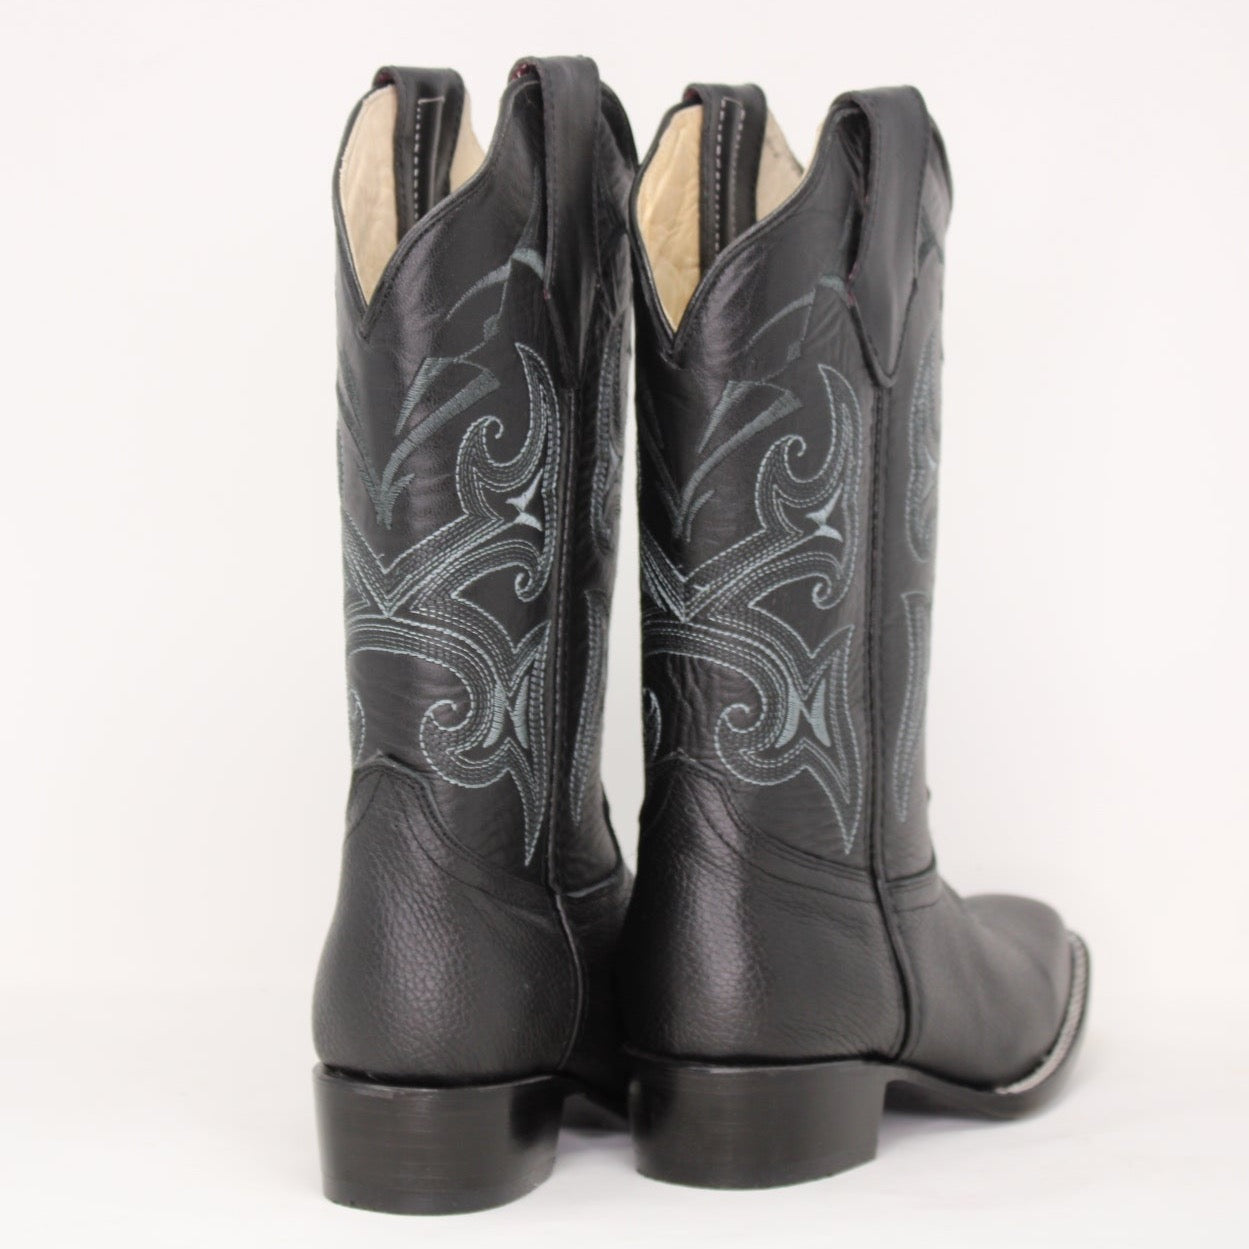 "Paisley" Pattern Cowgirl Boots